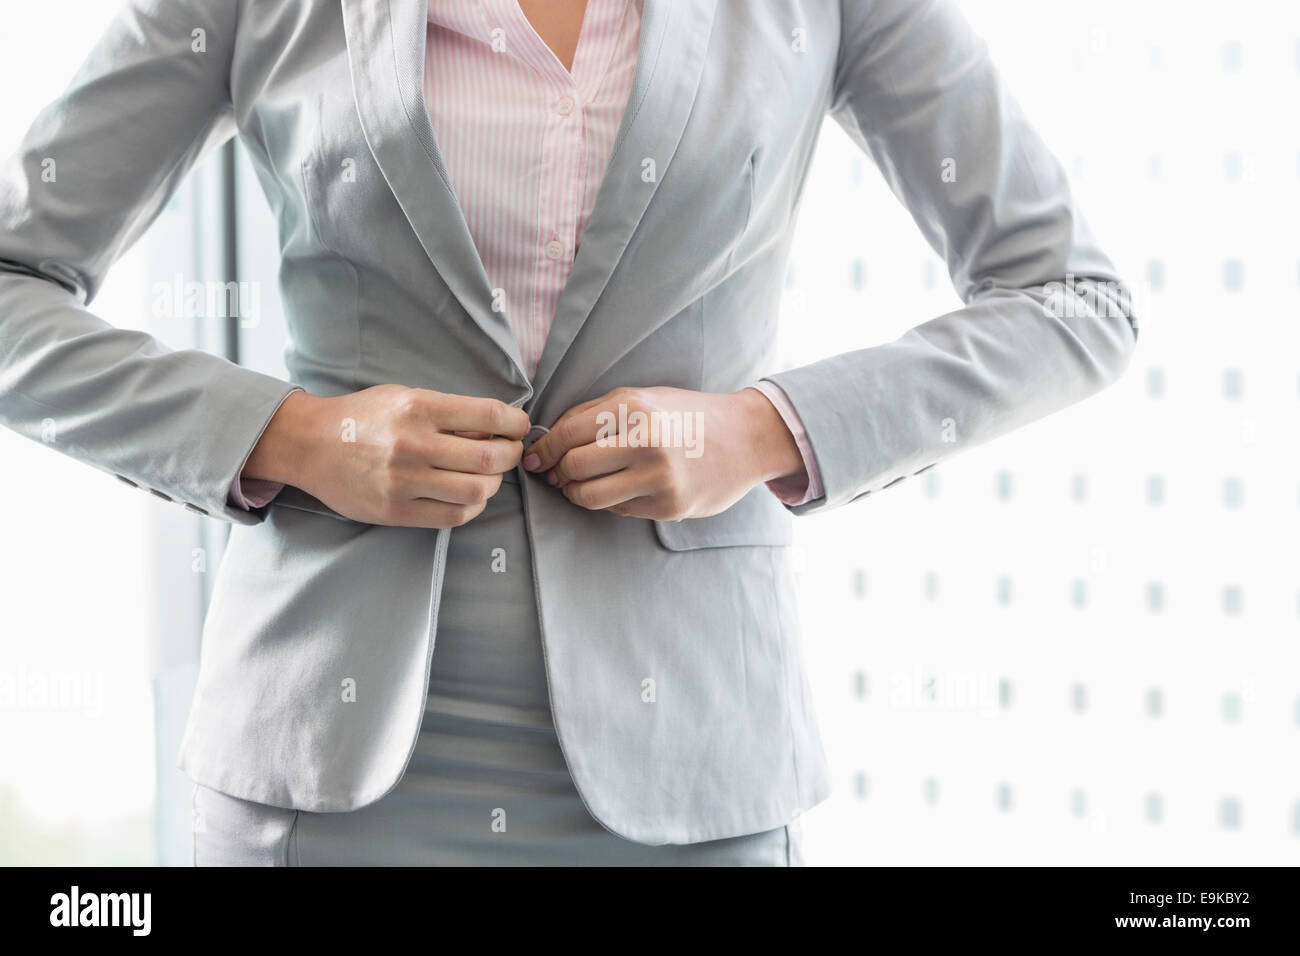 Midsection of businesswoman buttoning her blazer Stock Photo